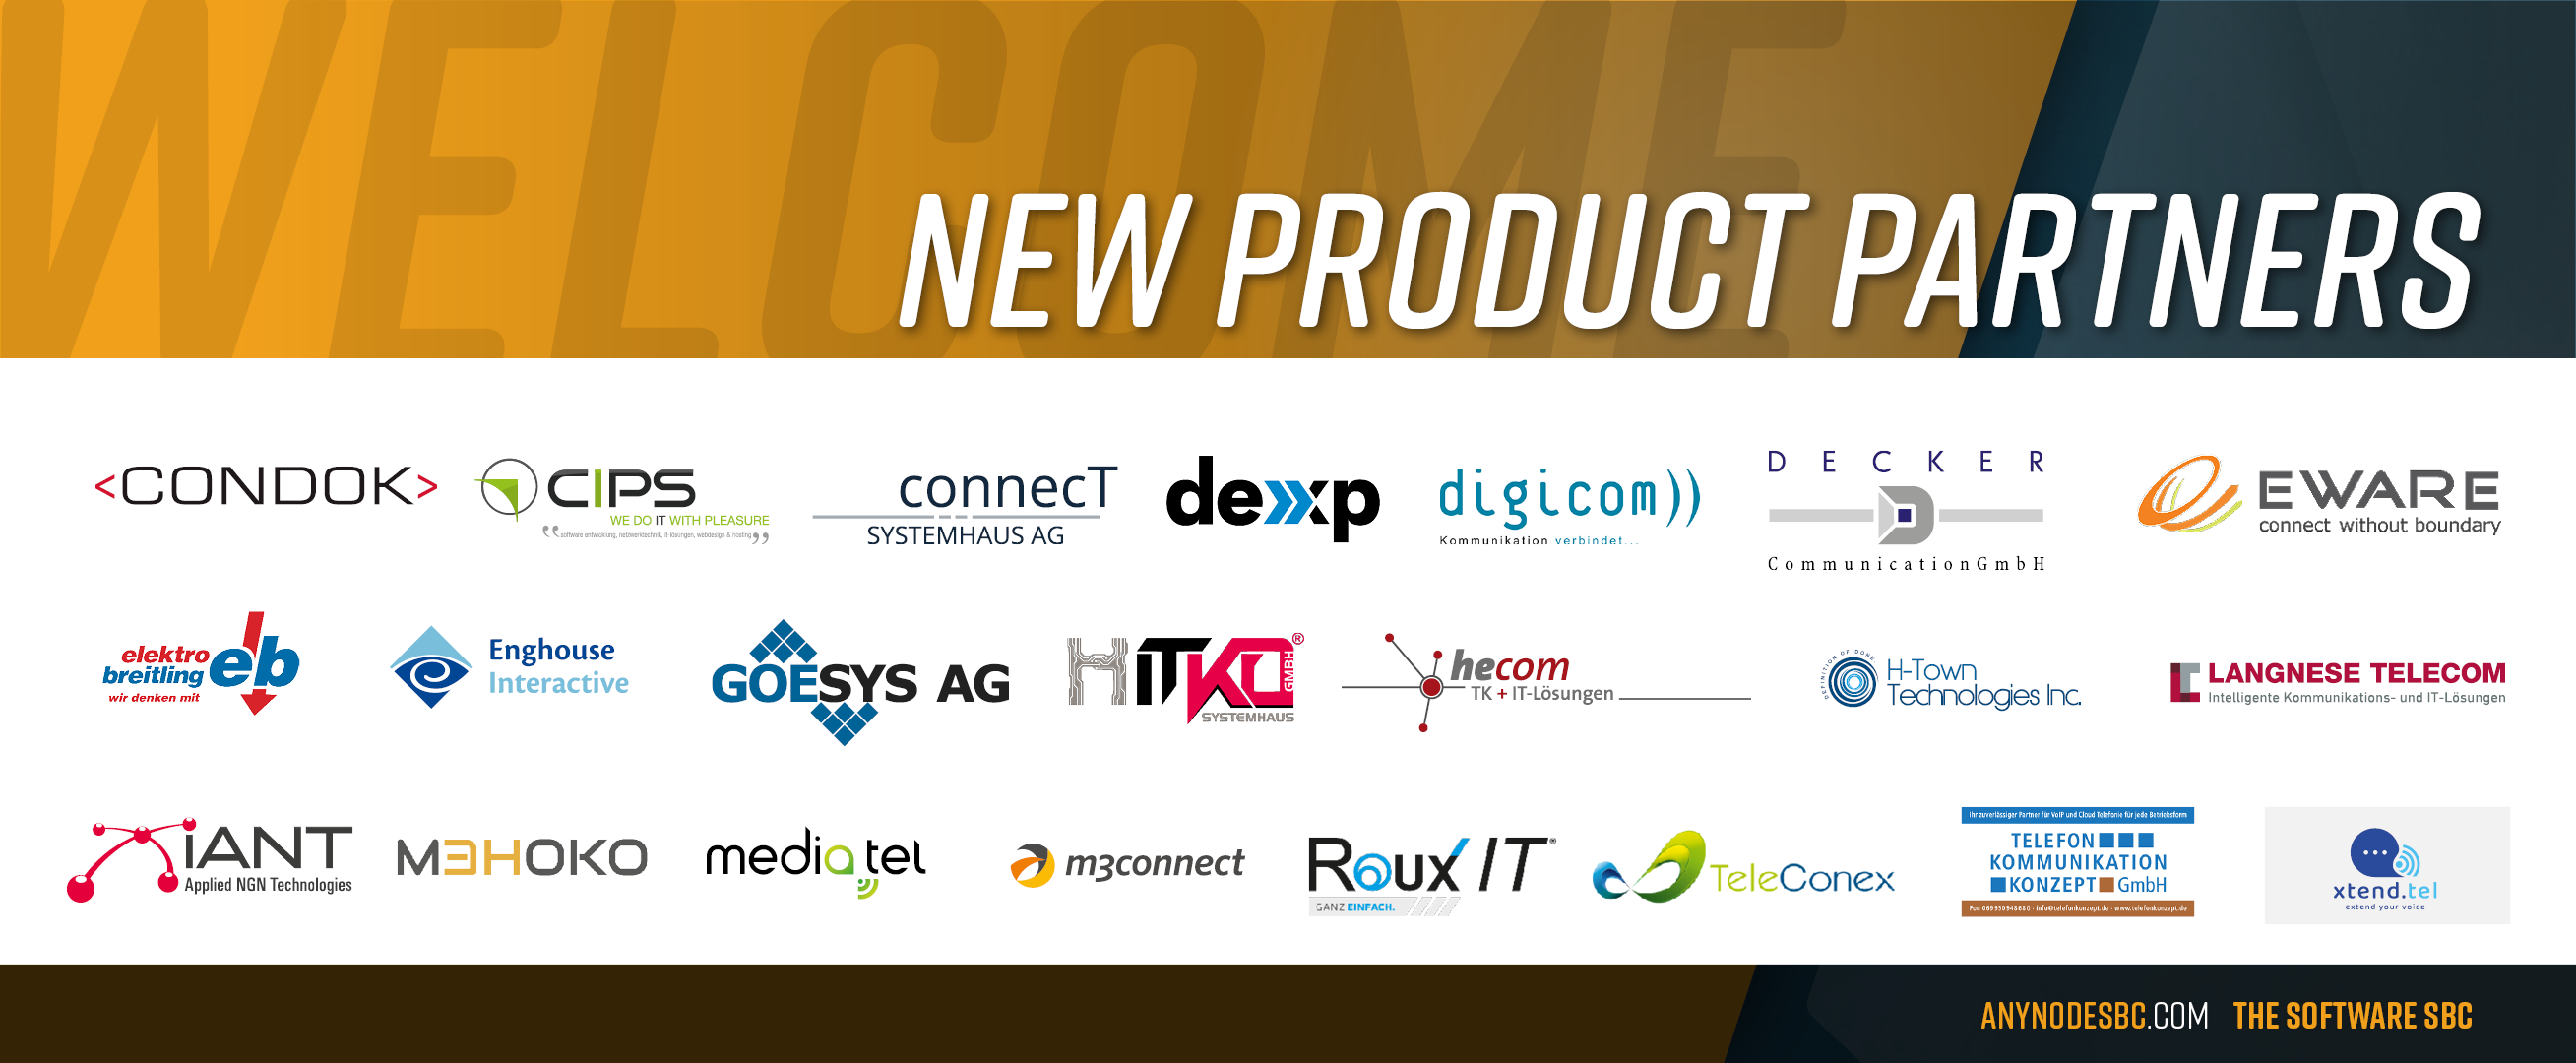 New anynode Product Partners in our Community!